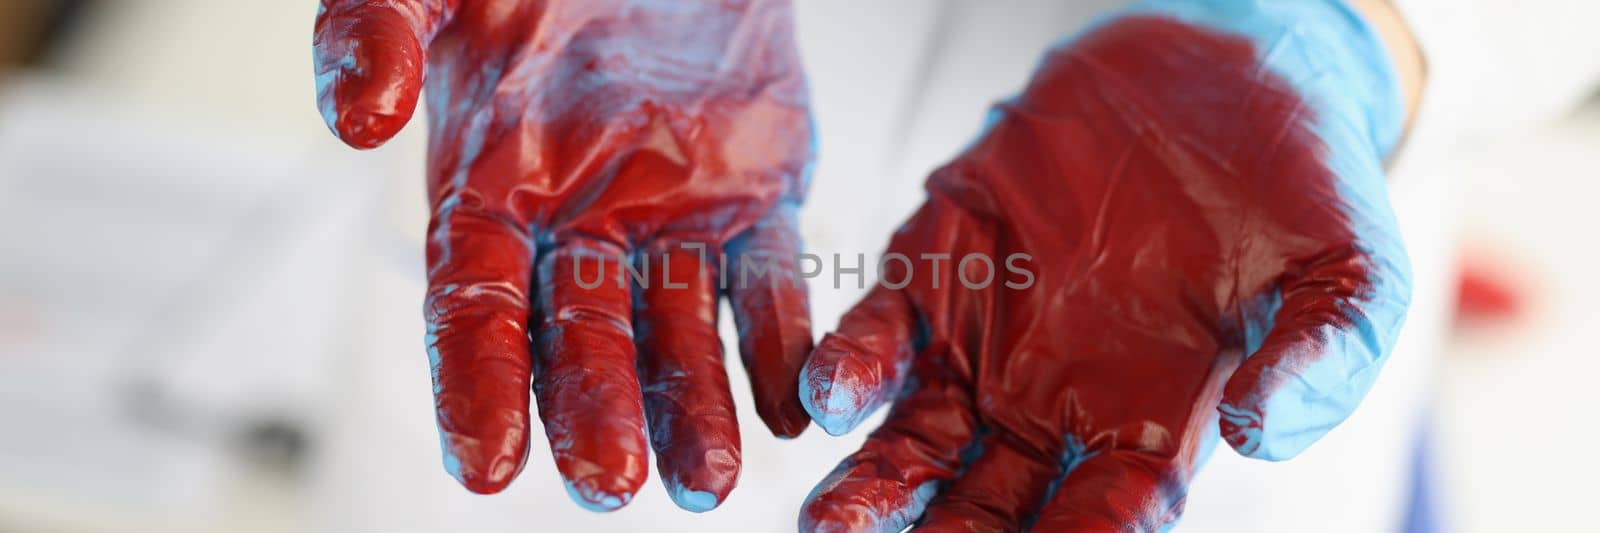 Surgeon in blue gloves with blood closeup by kuprevich